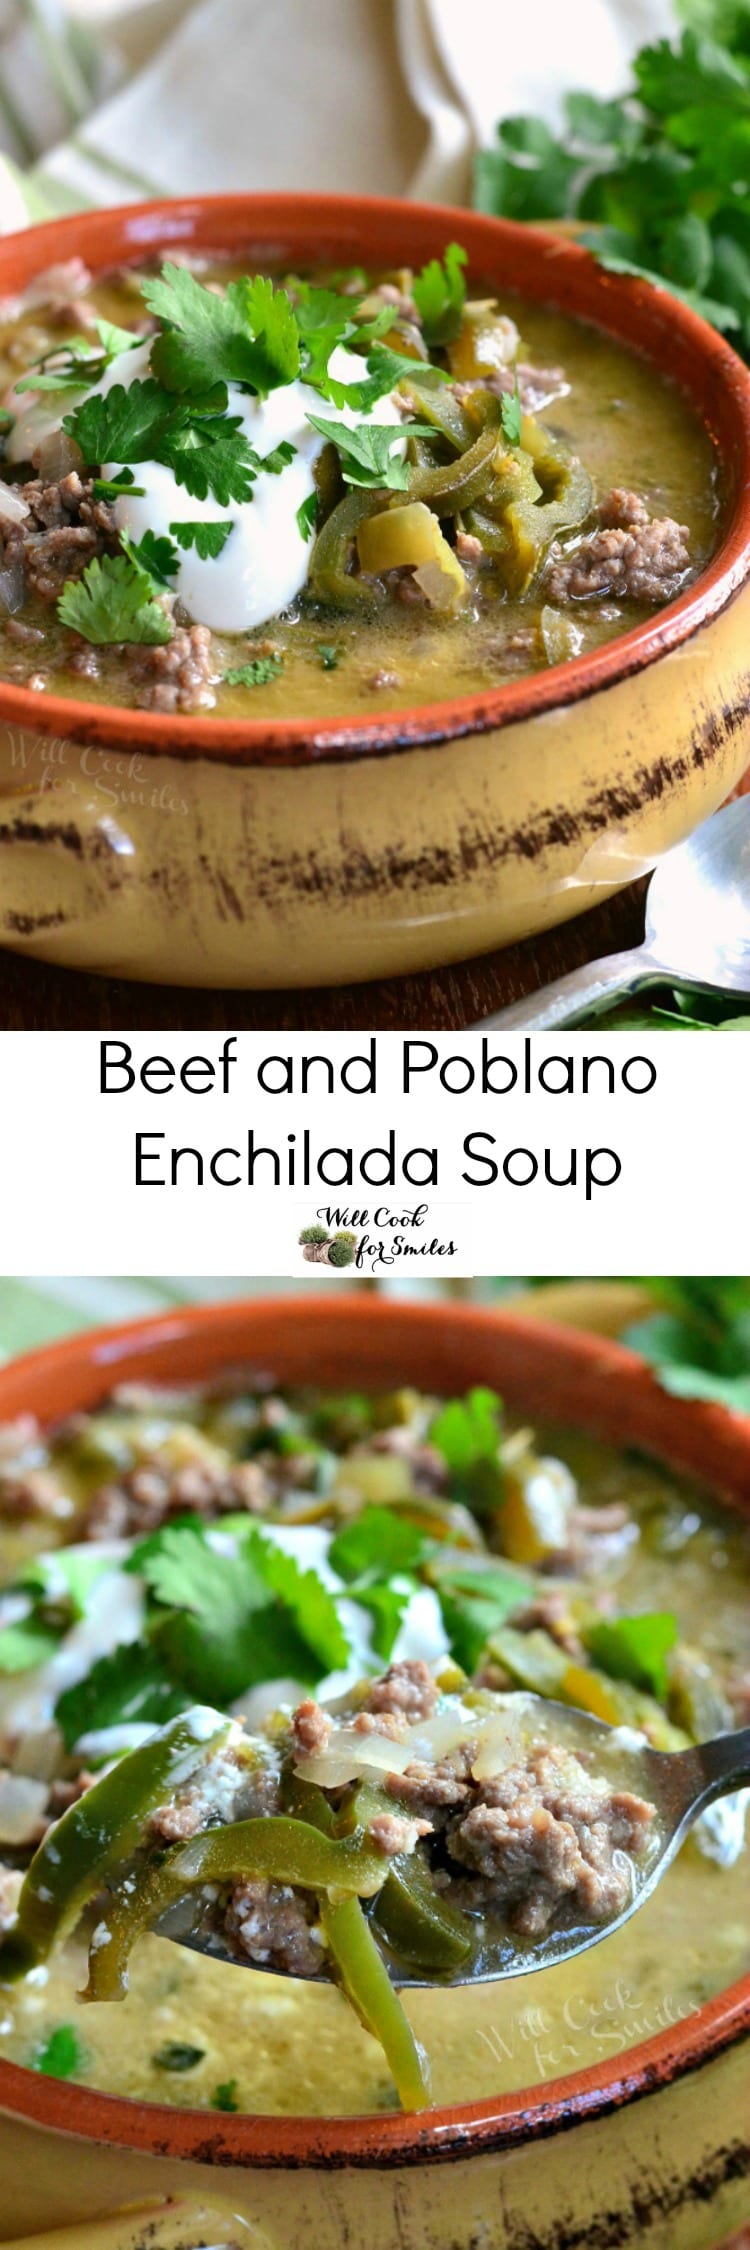 Beef and Poblano Enchilada Soup. Wonderful beef enchilada soup that's loaded with veggies and poblano peppers. 